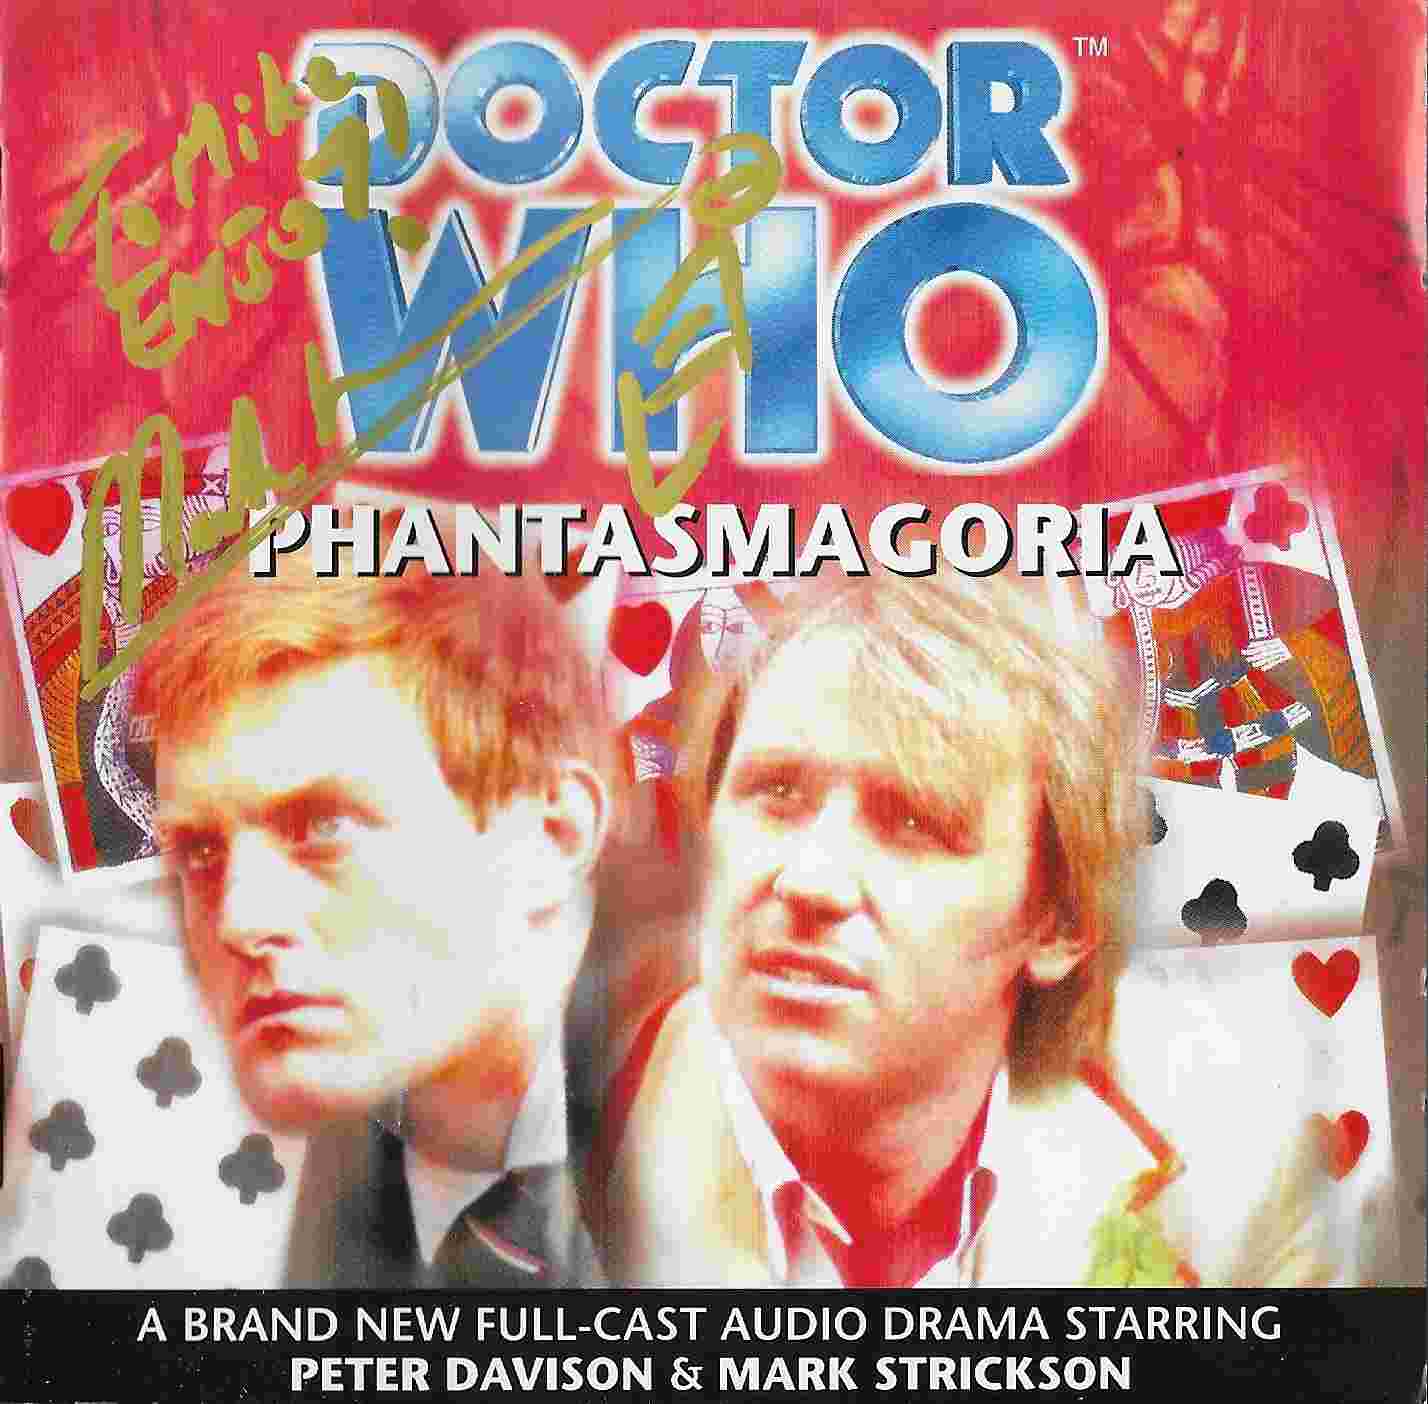 Picture of BFPDWCD 6PA Doctor who - Phantasmagoria by artist Mark Gatiss from the BBC records and Tapes library